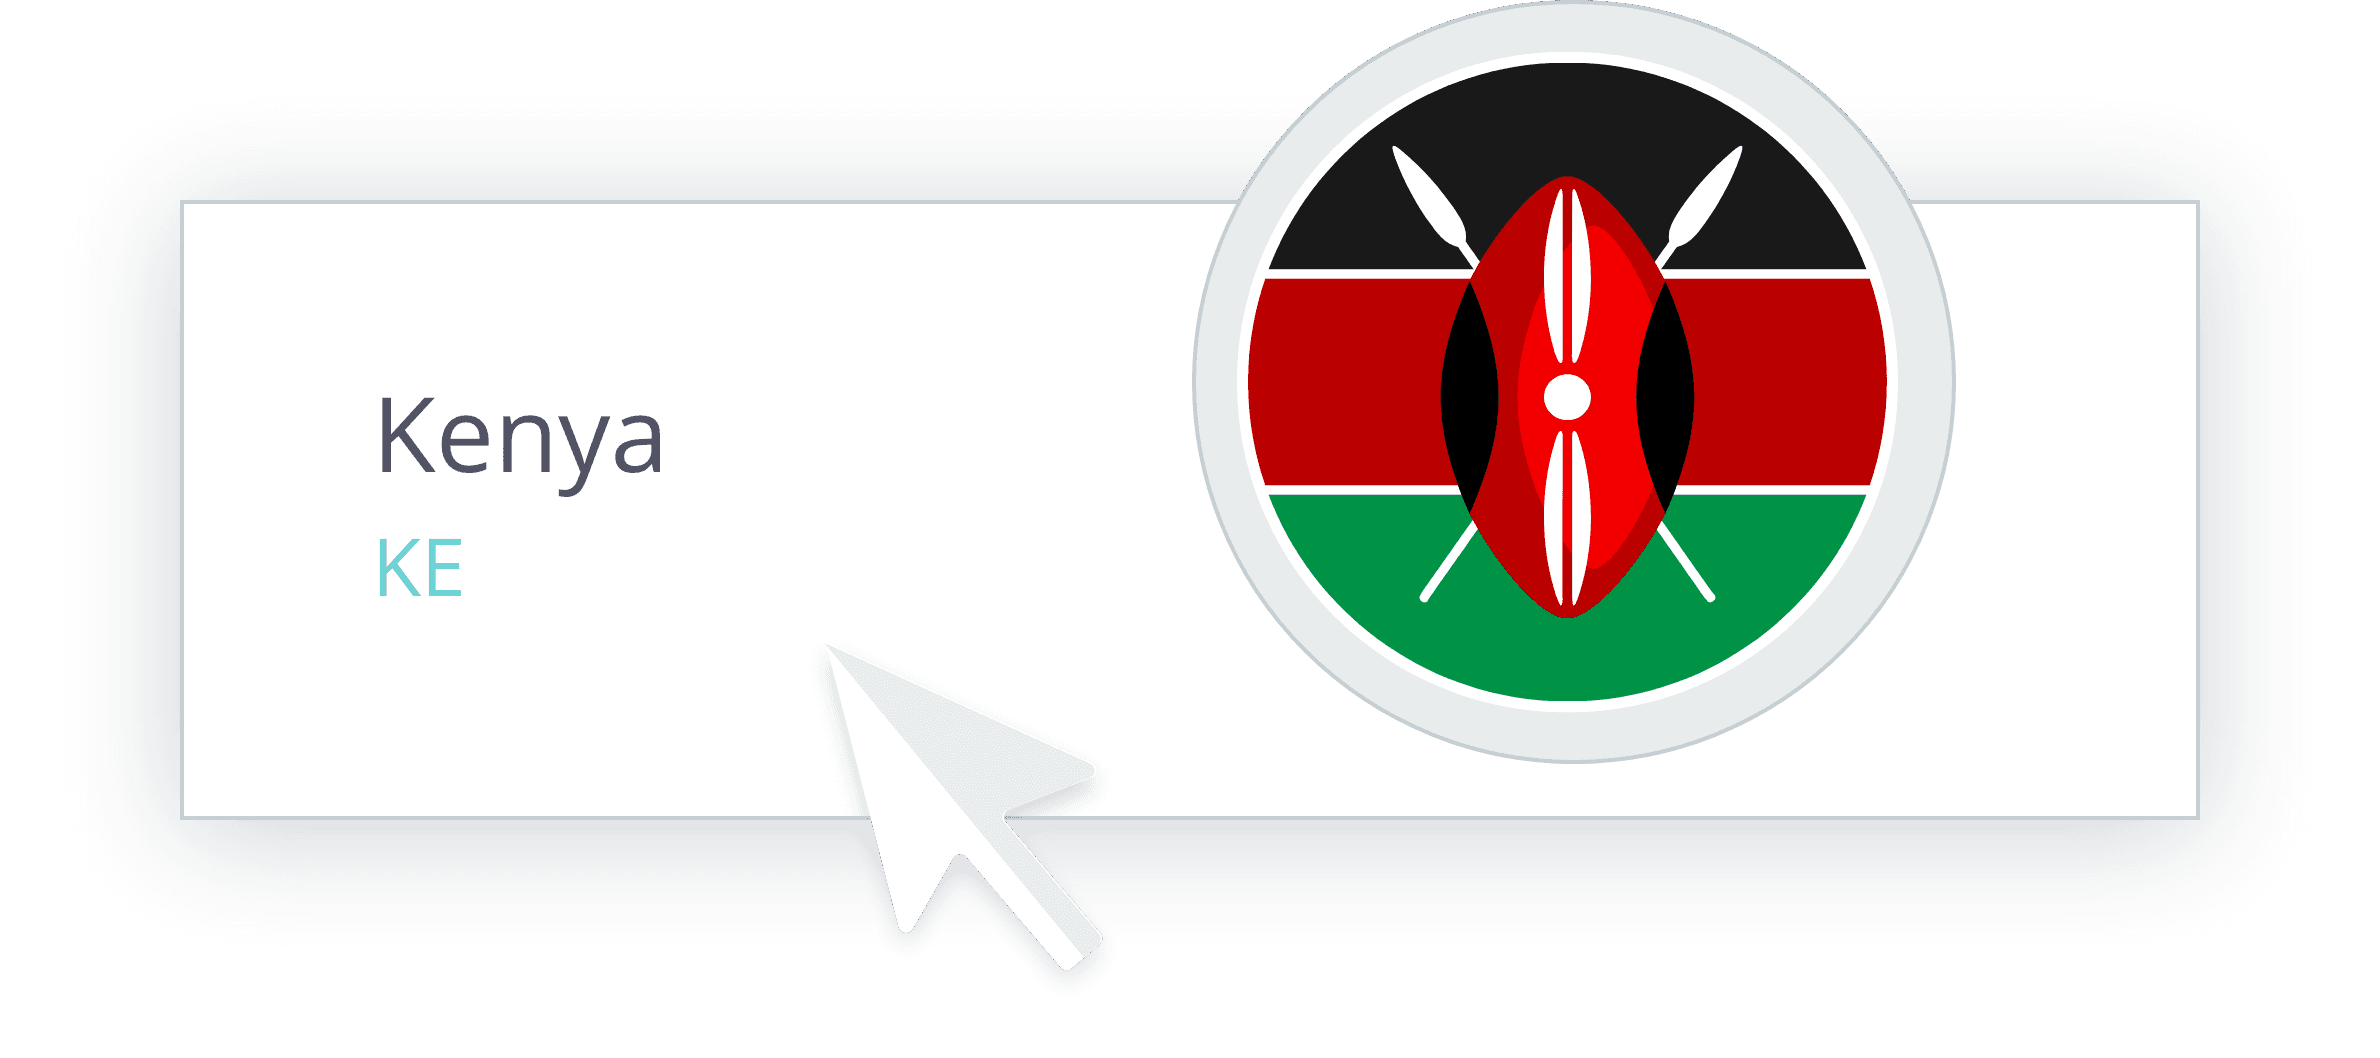 Ribbon showcasing a Ribbon with Kenya country's flag and a mouse.